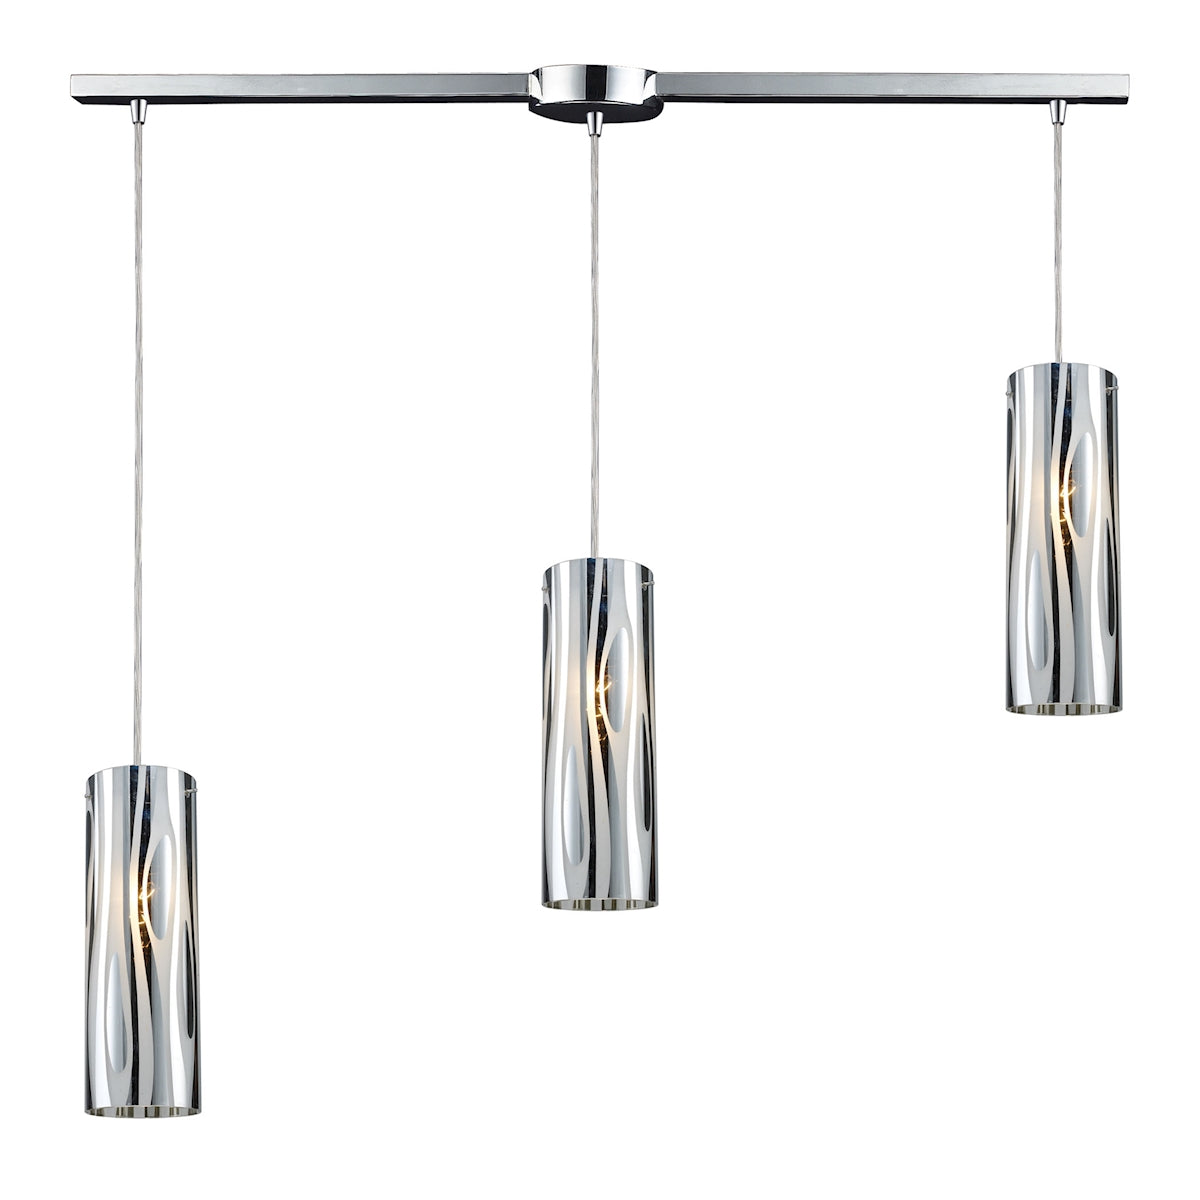 ELK Lighting 31078/3L Chromia 3-Light Linear Pendant Fixture in Polished Chrome with Cylinder Shade